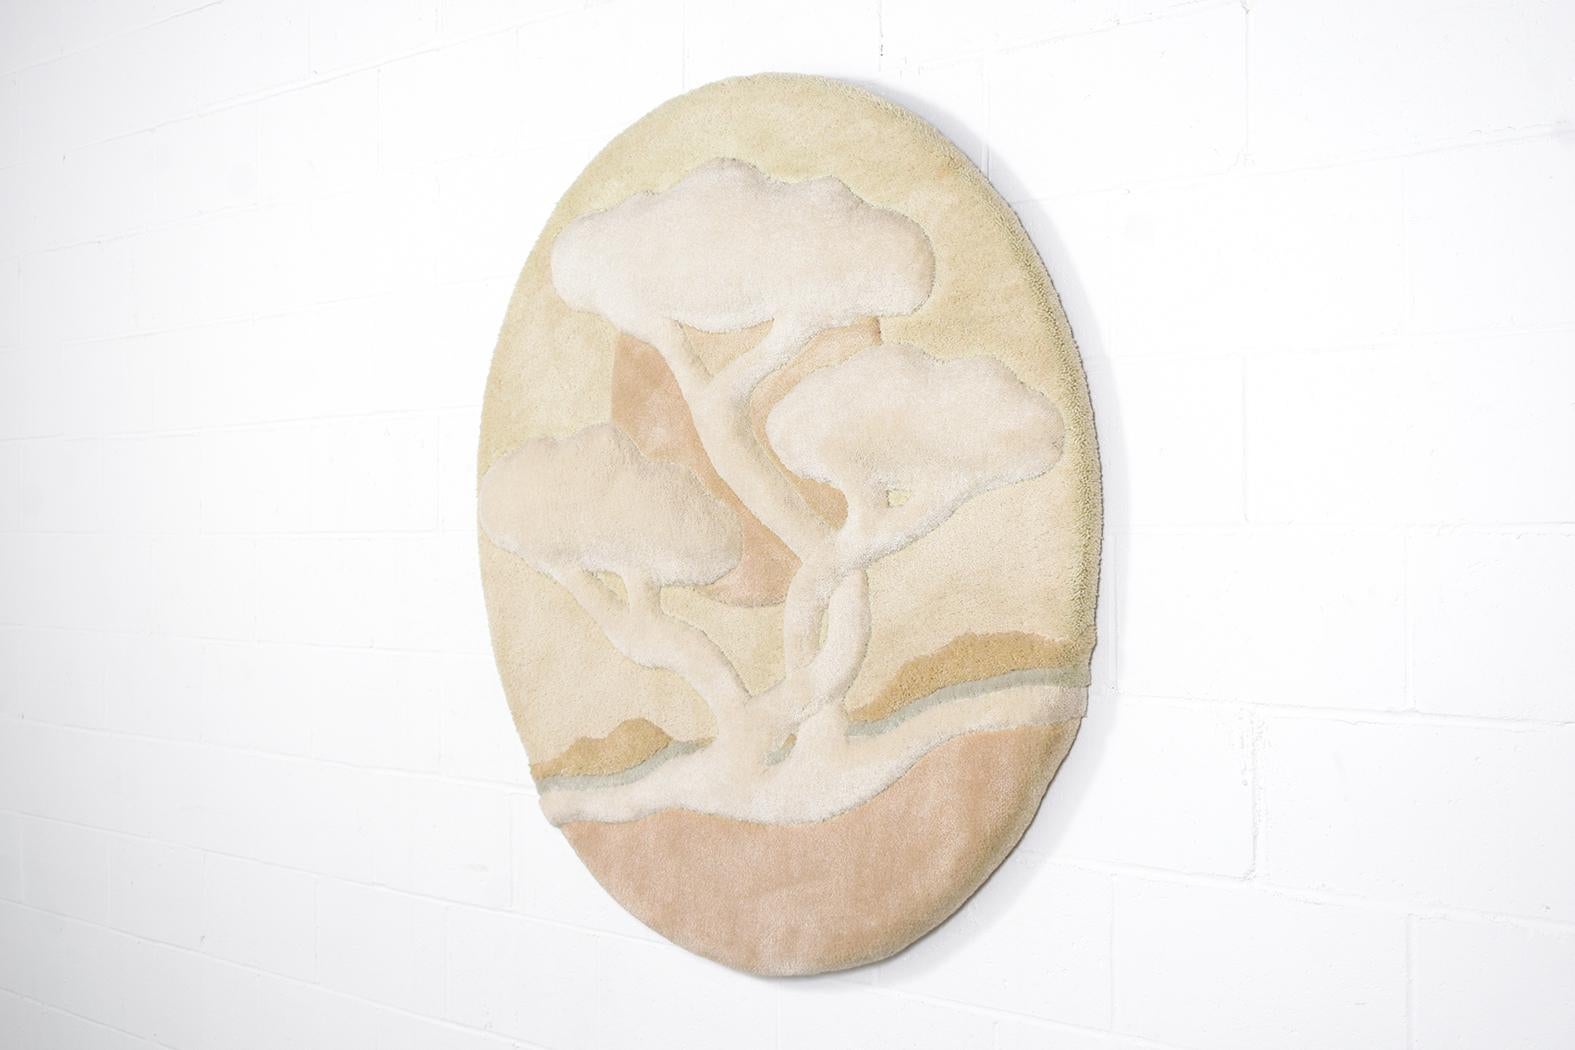 Dive into the 1970s allure with our stunning Mid-Century Modern Circular Vintage Sculpture. Perfectly preserved, this wooden masterpiece boasts a handcrafted tapestry, portraying a serene bonsai tree bathed in sunset hues. Its light color palette